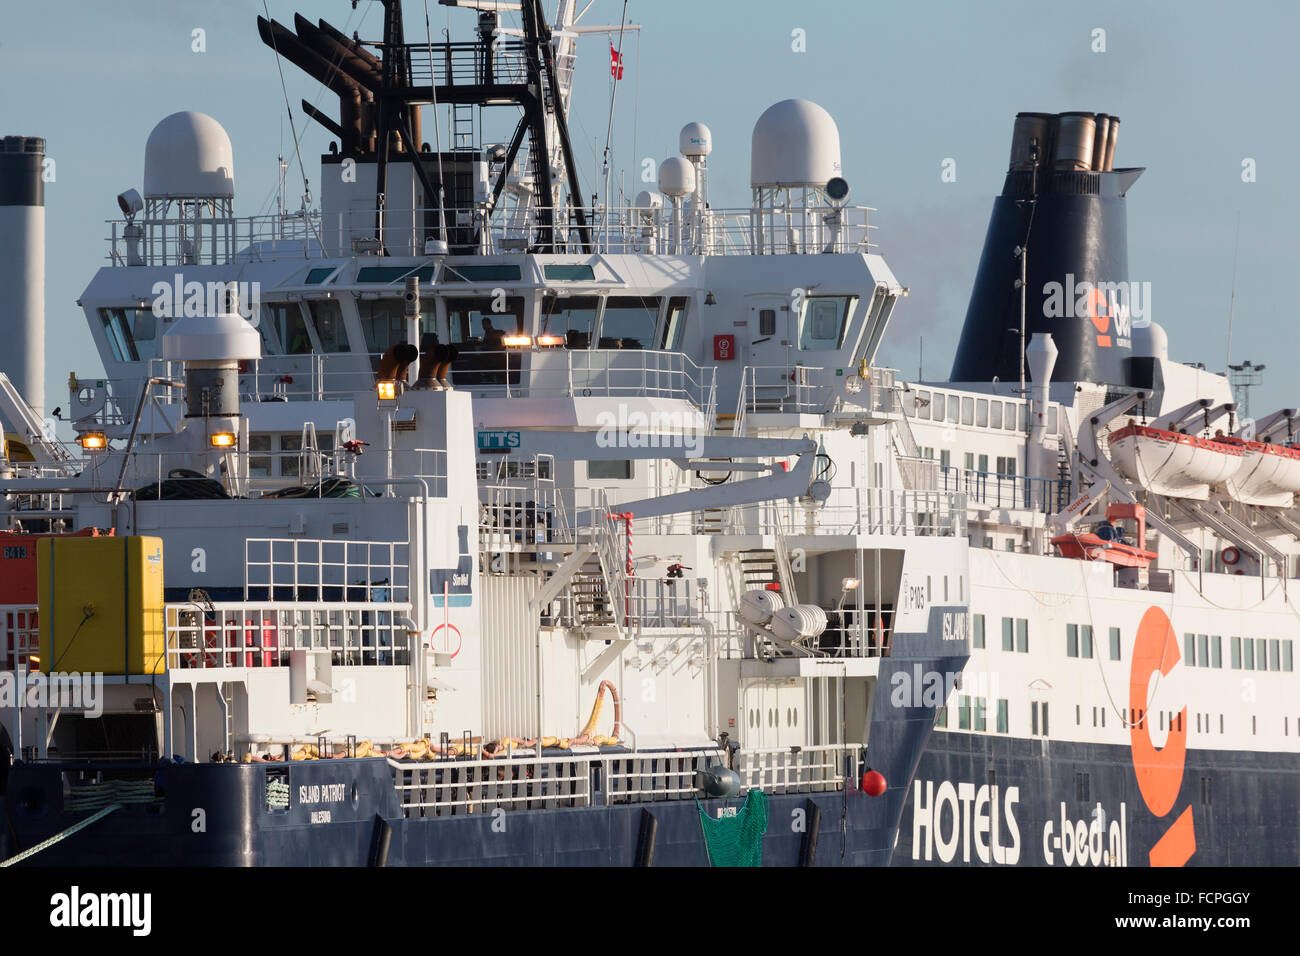 Oil and wind energy support vessel at Esbjerg. Stock Photo